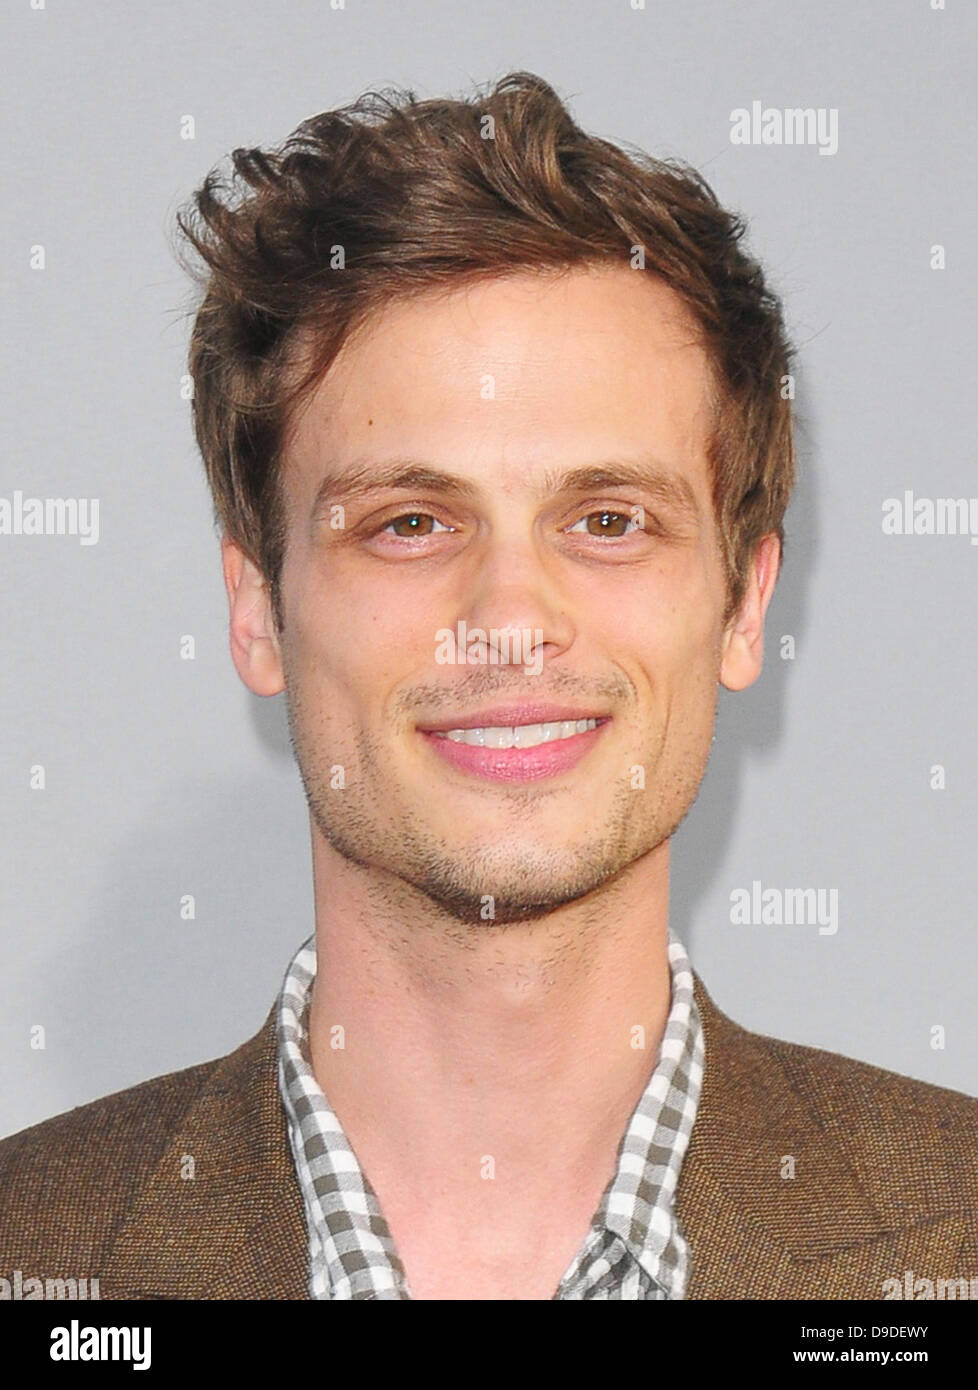 Matthew Gray Gubler Los Angeles Premiere of 'Source Code' held at the  Arclight Cinerama Dome - Arrivals Los Angeles, California - 28.03.11 Stock  Photo - Alamy